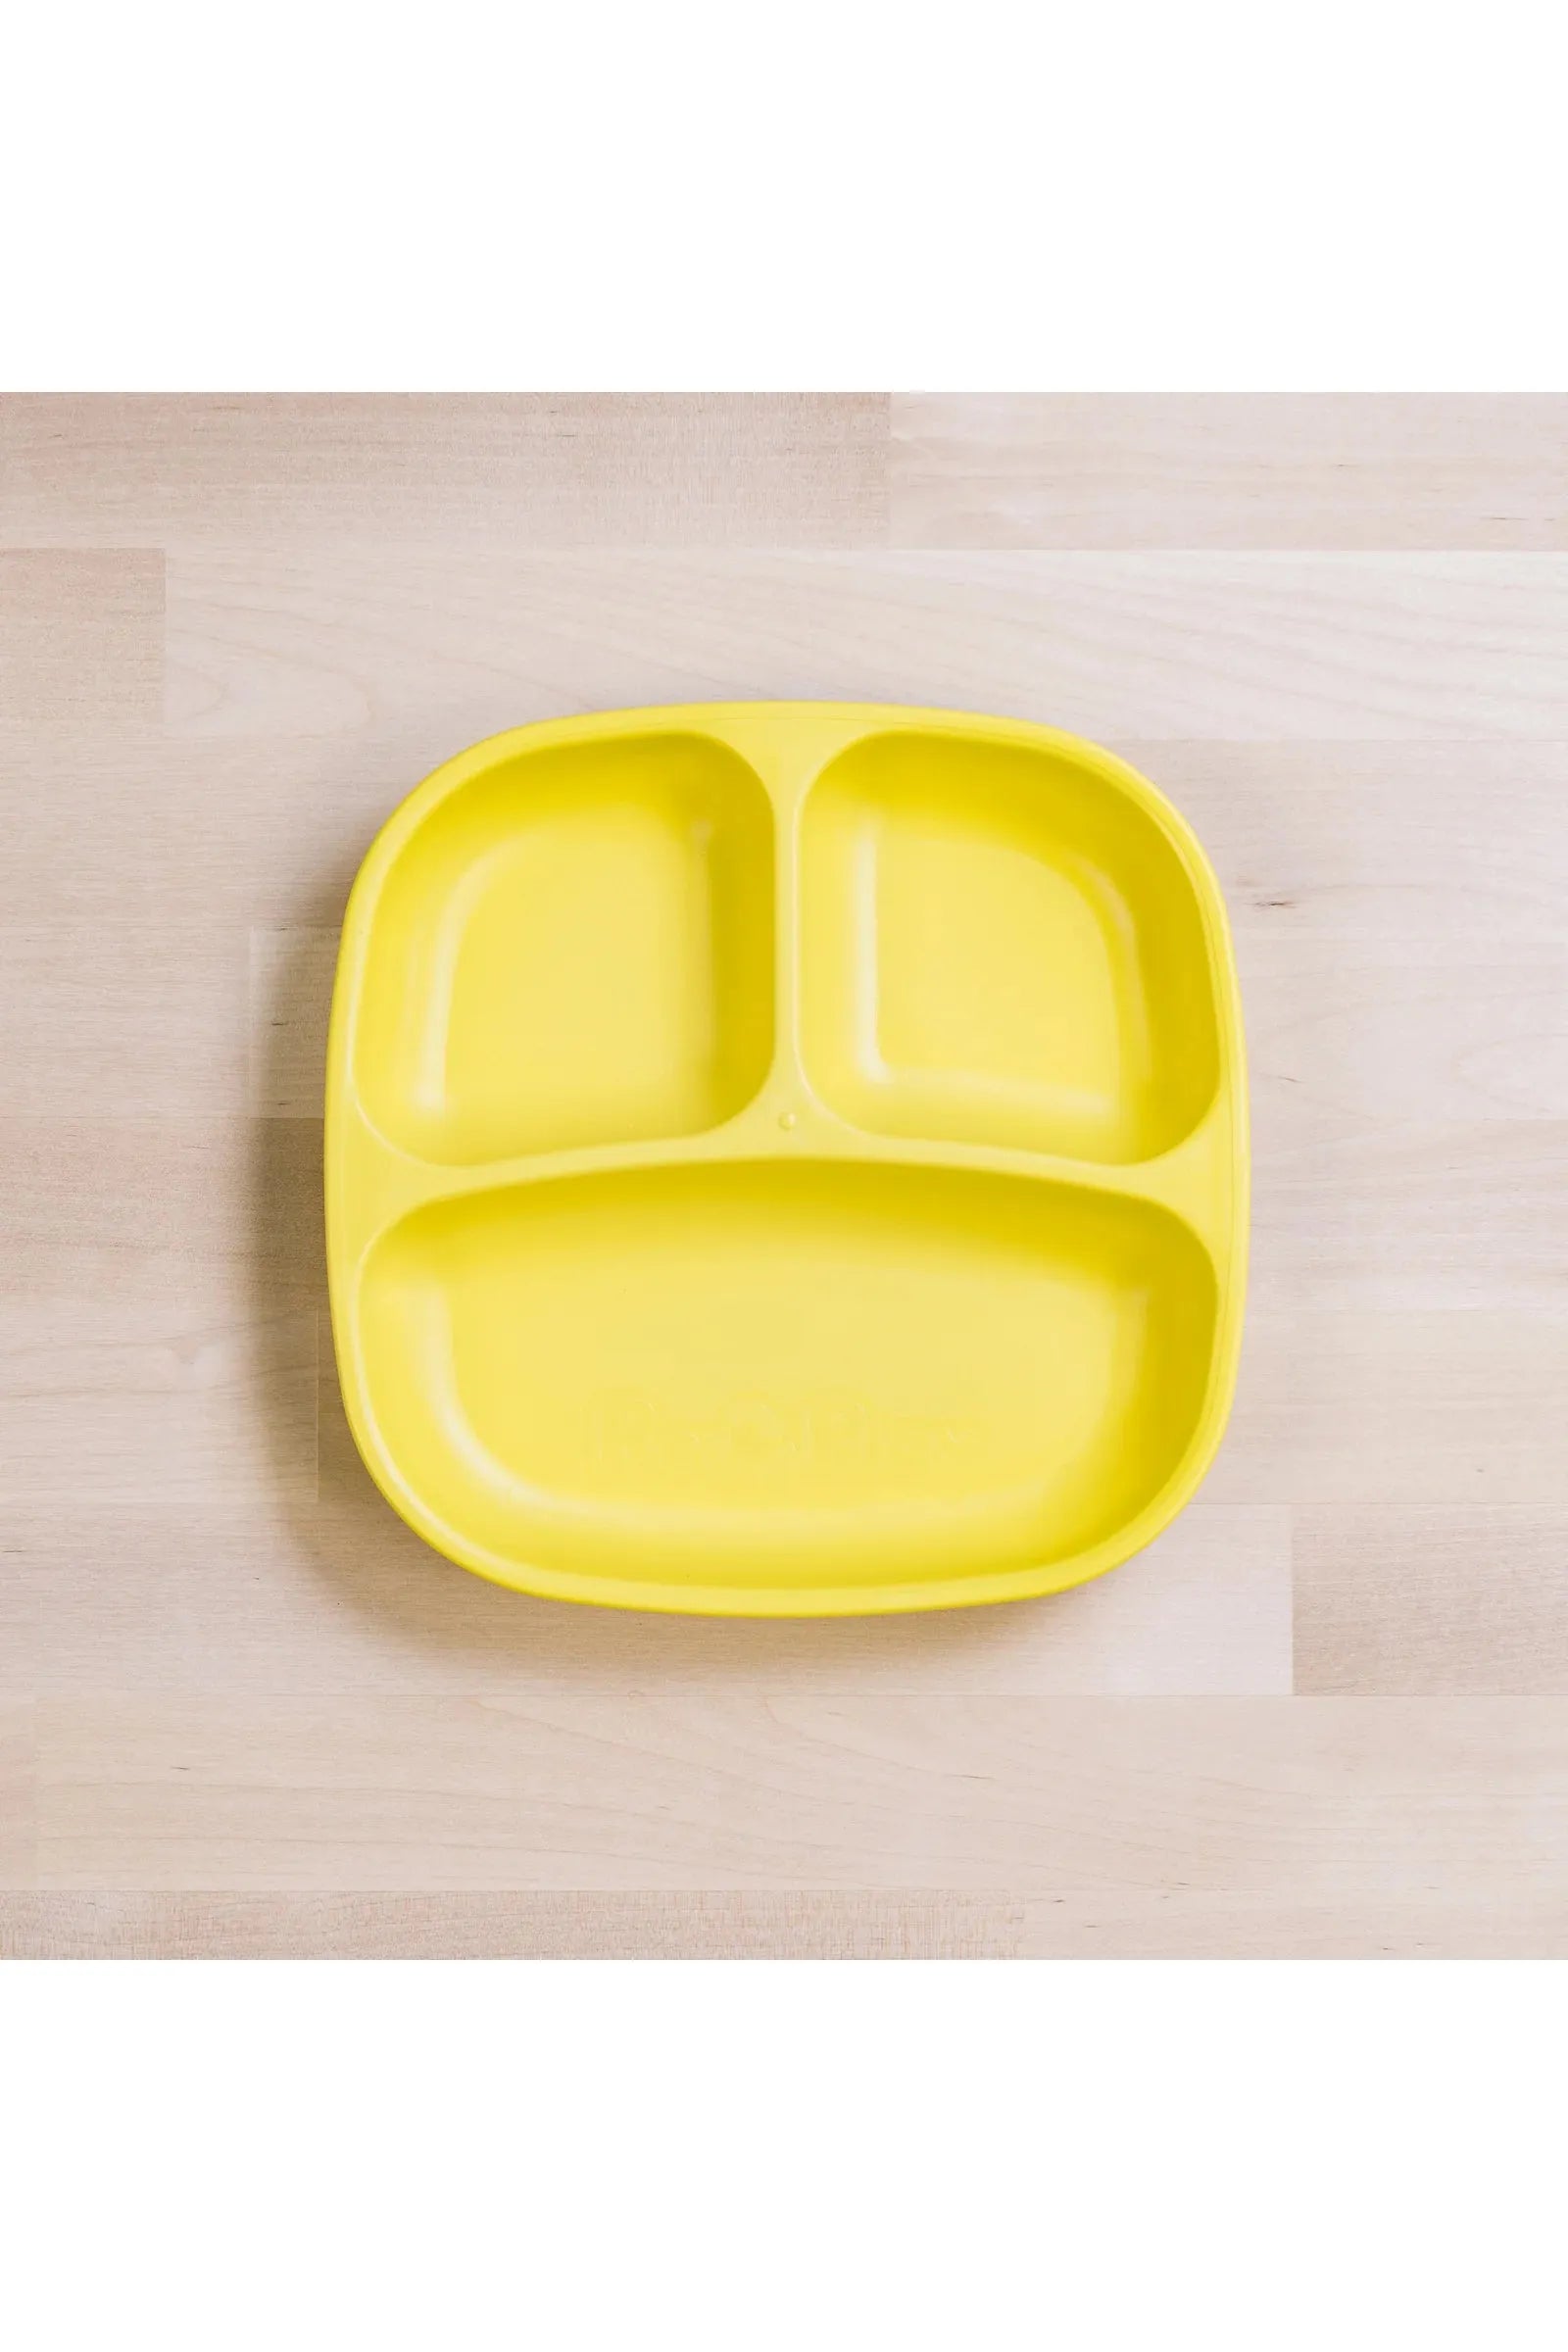 Re-Play Divided Plate - Bright Yellow